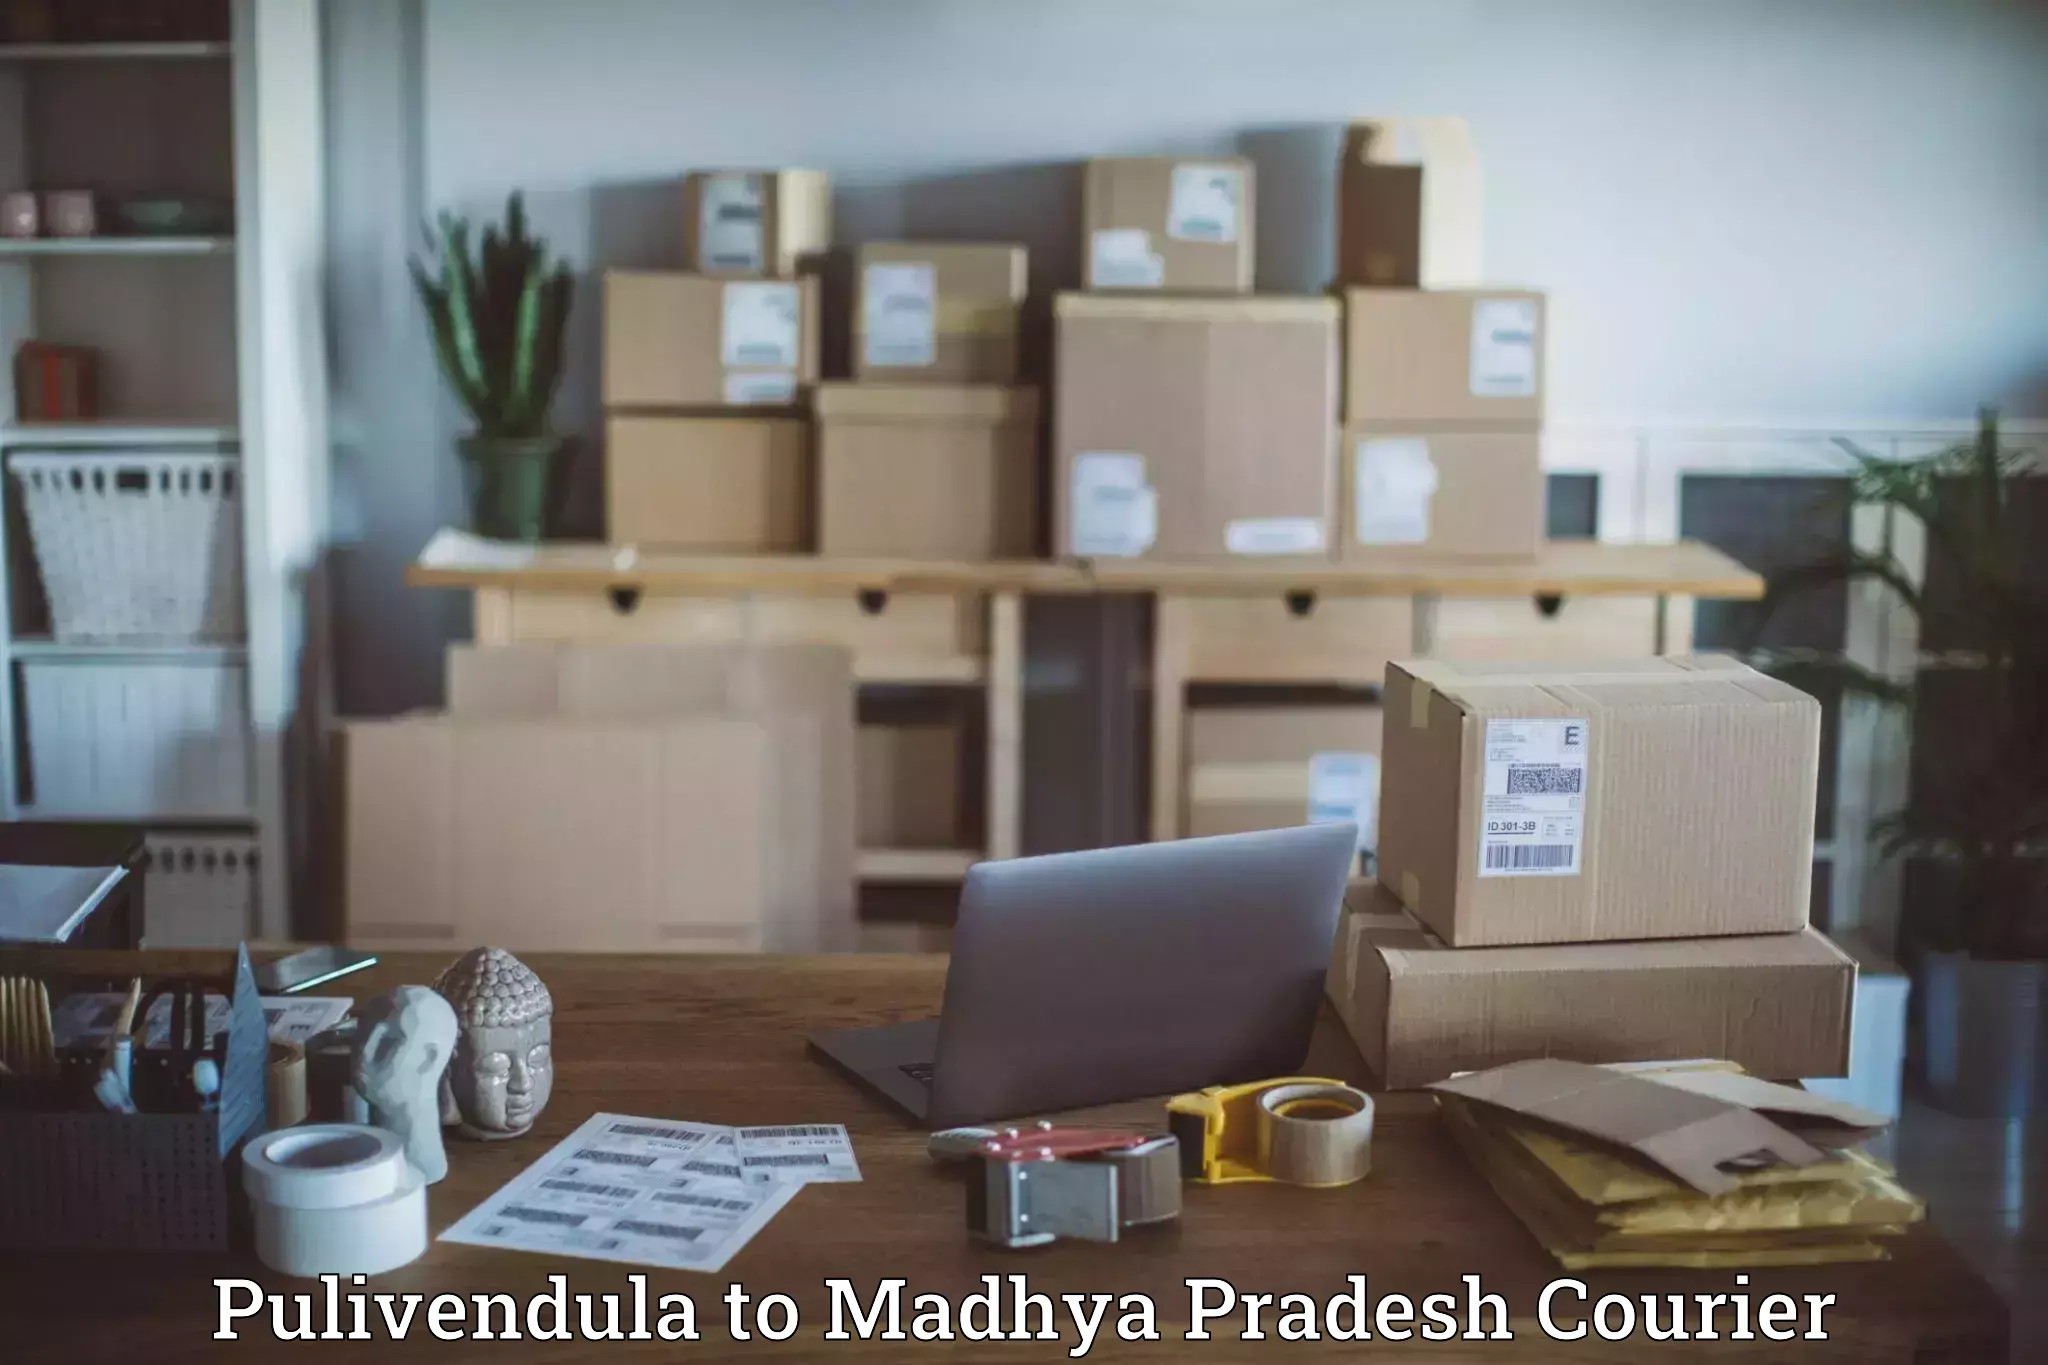 Easy access courier services in Pulivendula to Sehore